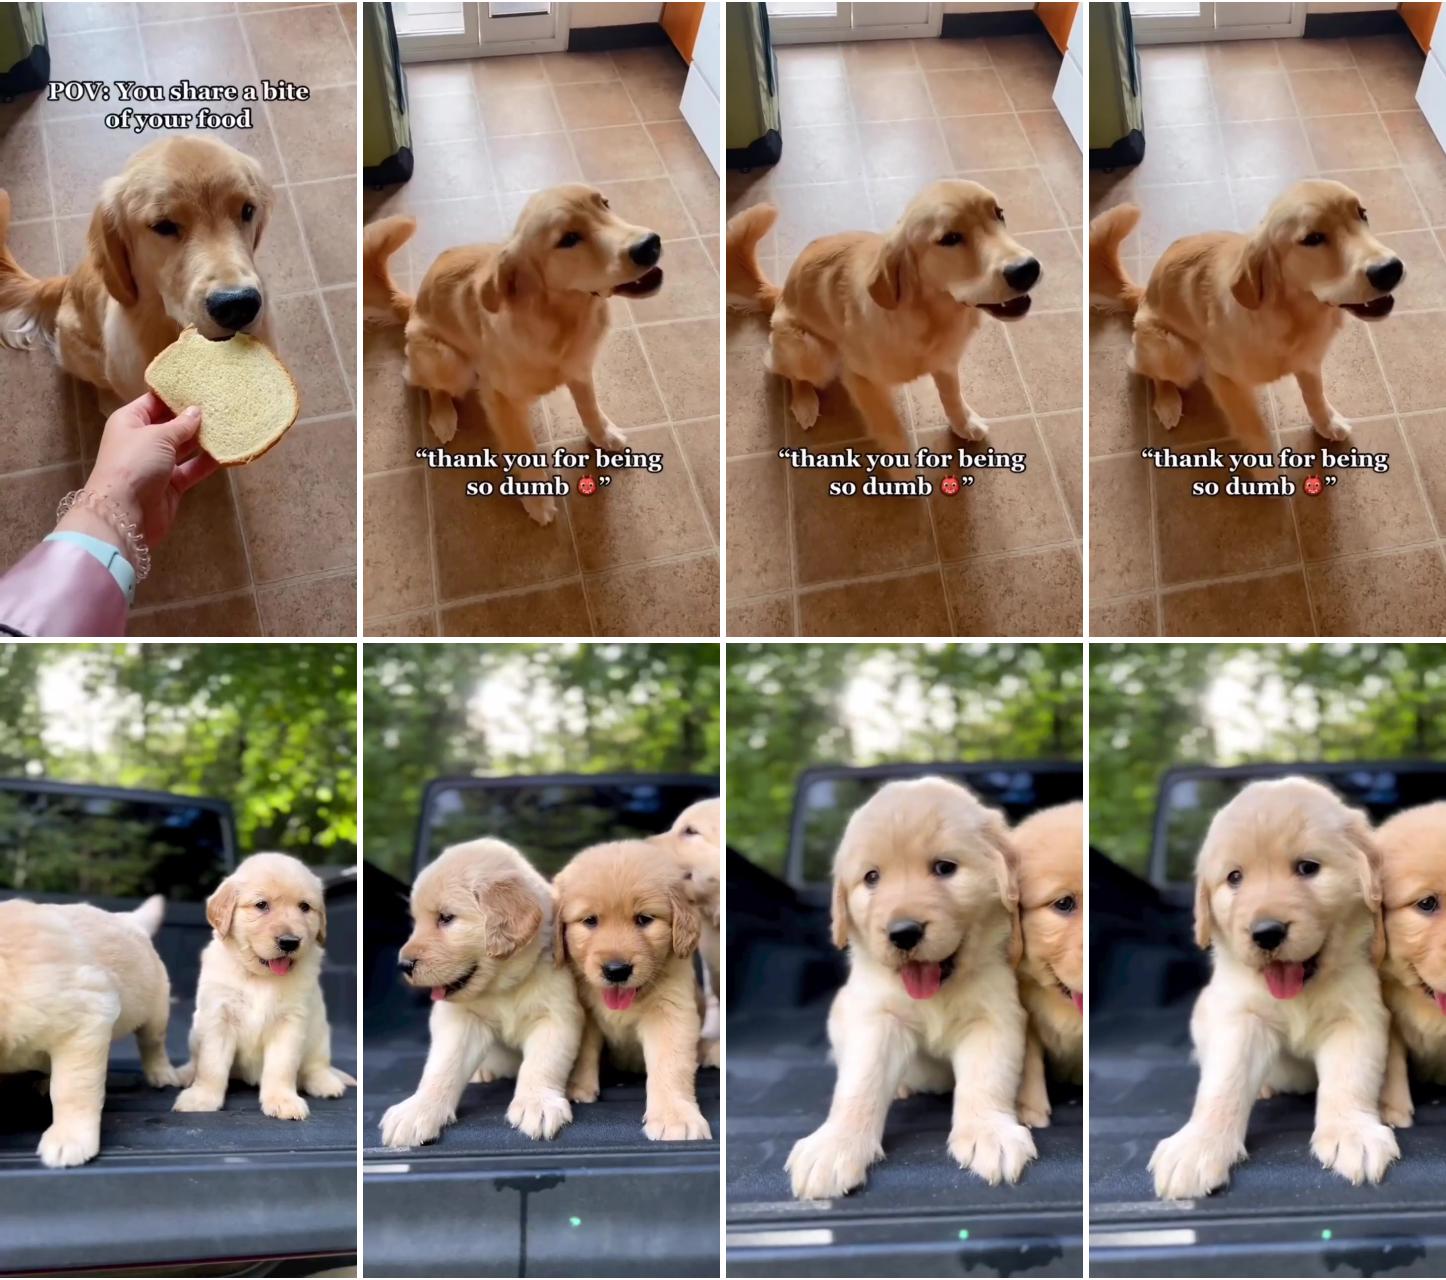 And you fell for it; golden retriever puppies 